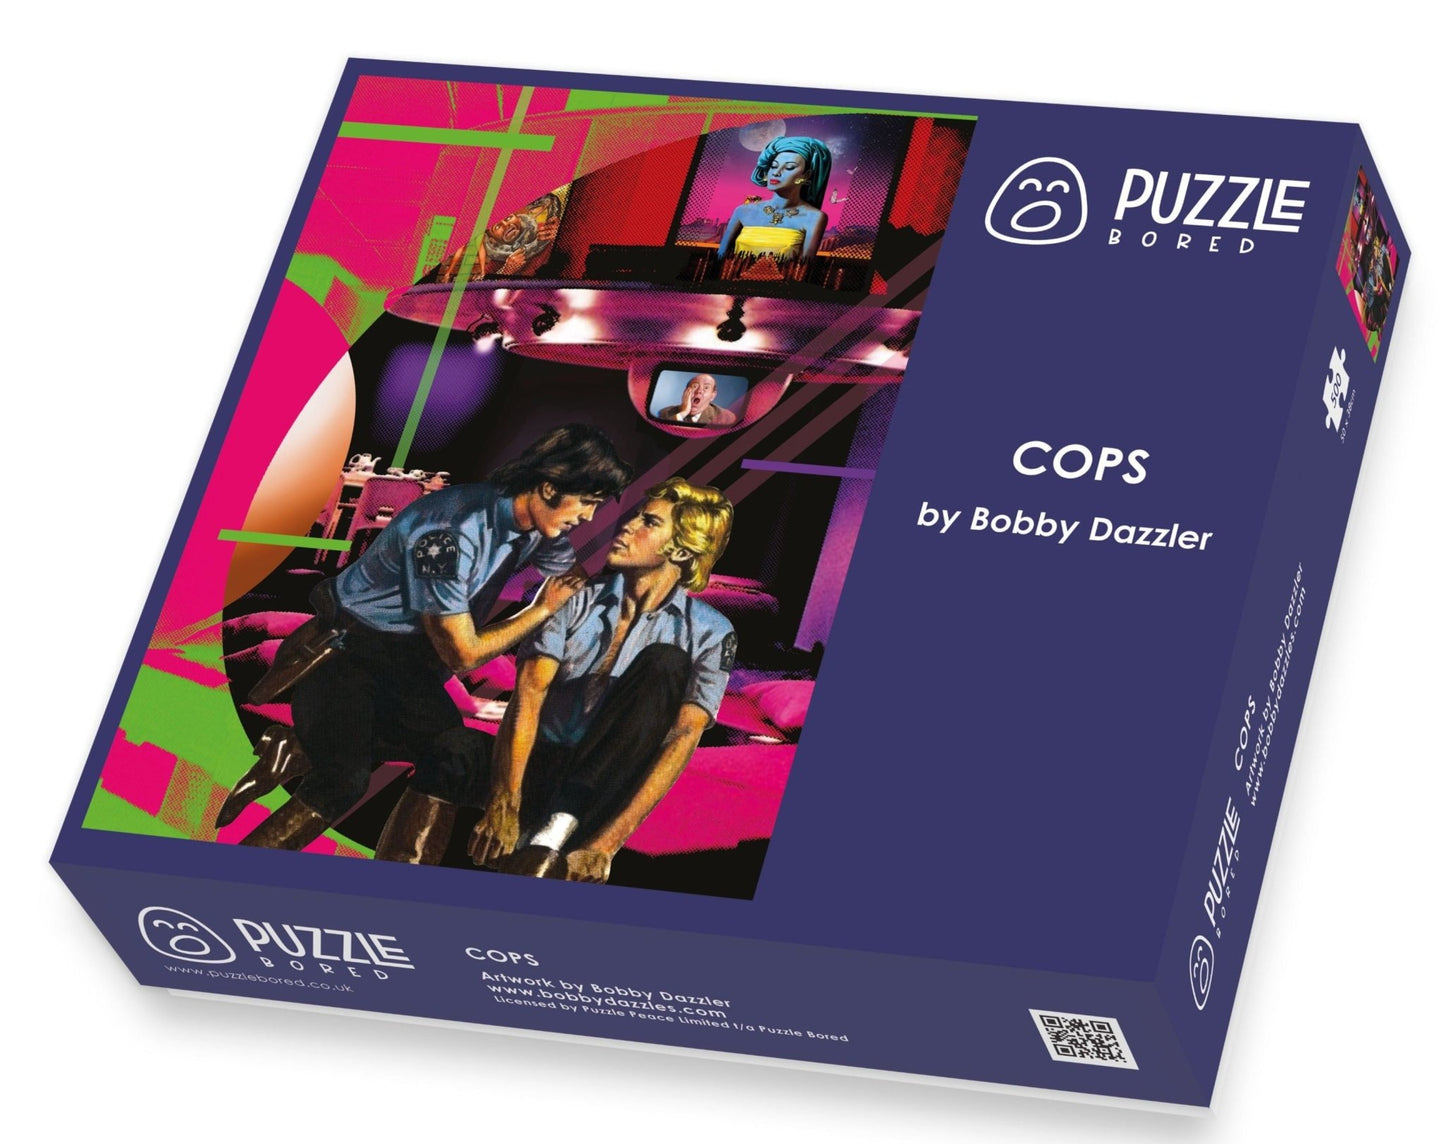 Cops by Bobby Dazzler - Puzzle Bored